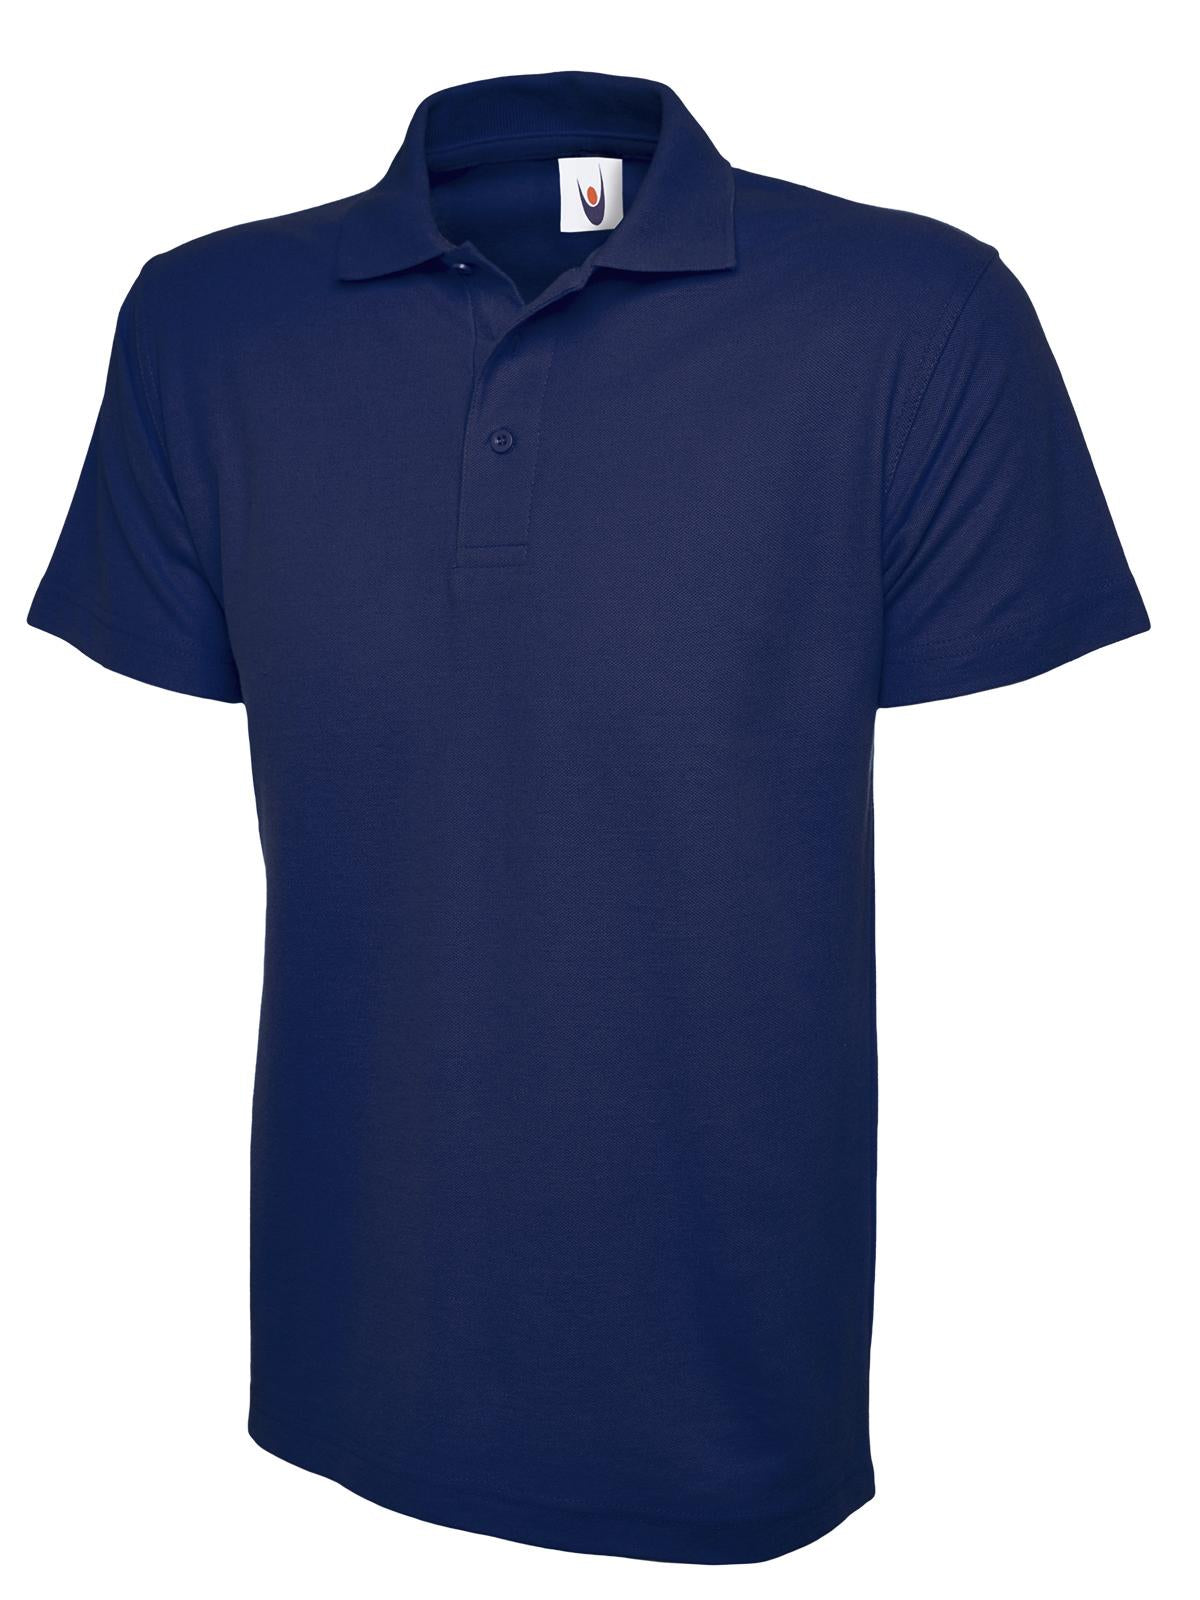 UC101 - Classic Polo French Navy